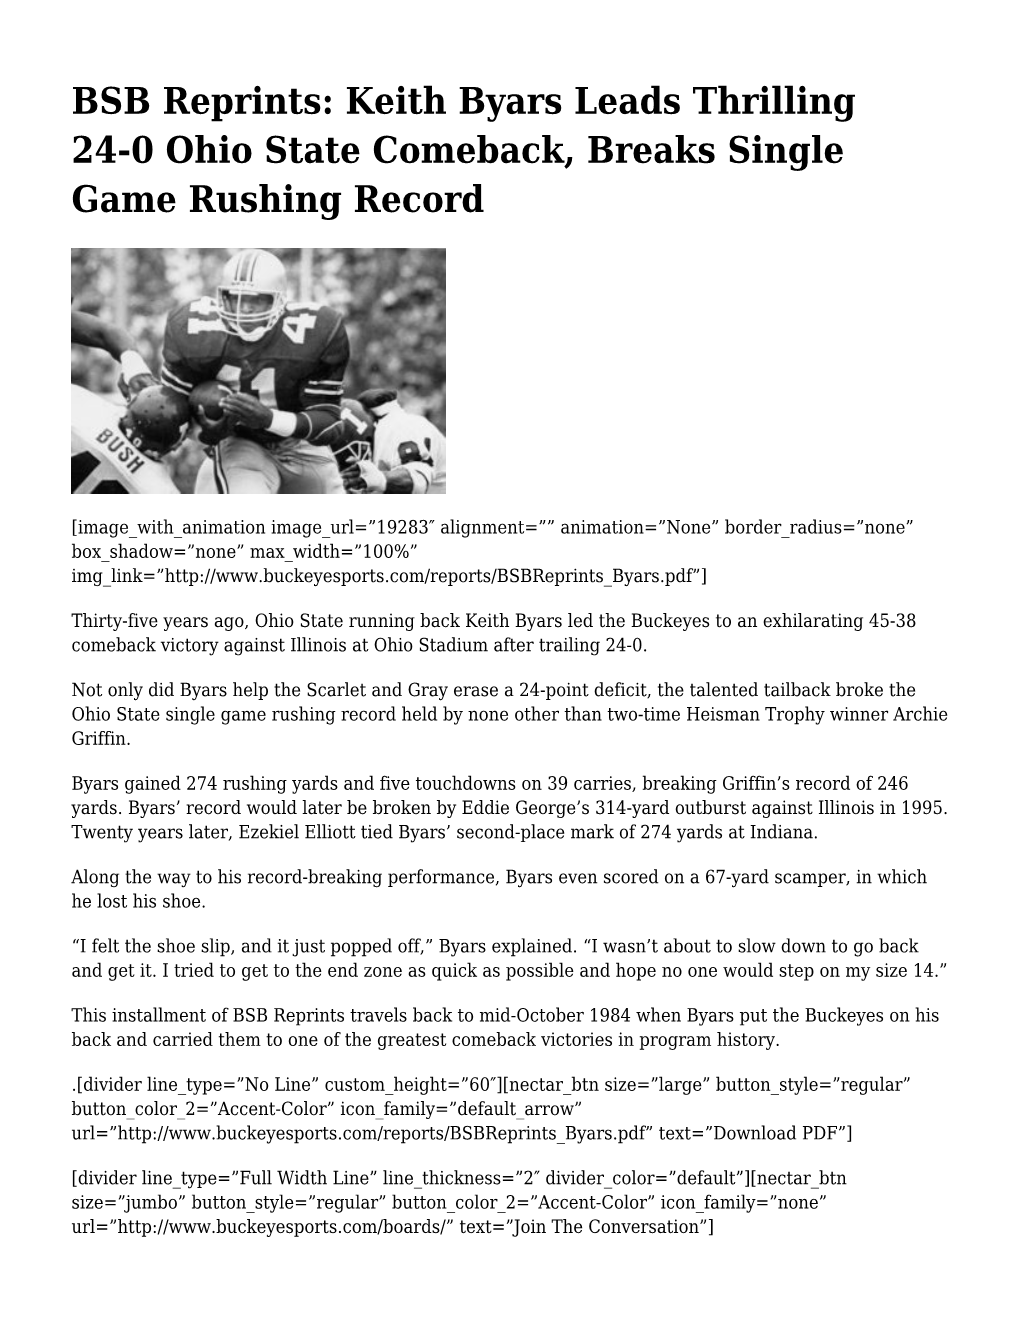 BSB Reprints: Keith Byars Leads Thrilling 24-0 Ohio State Comeback, Breaks Single Game Rushing Record